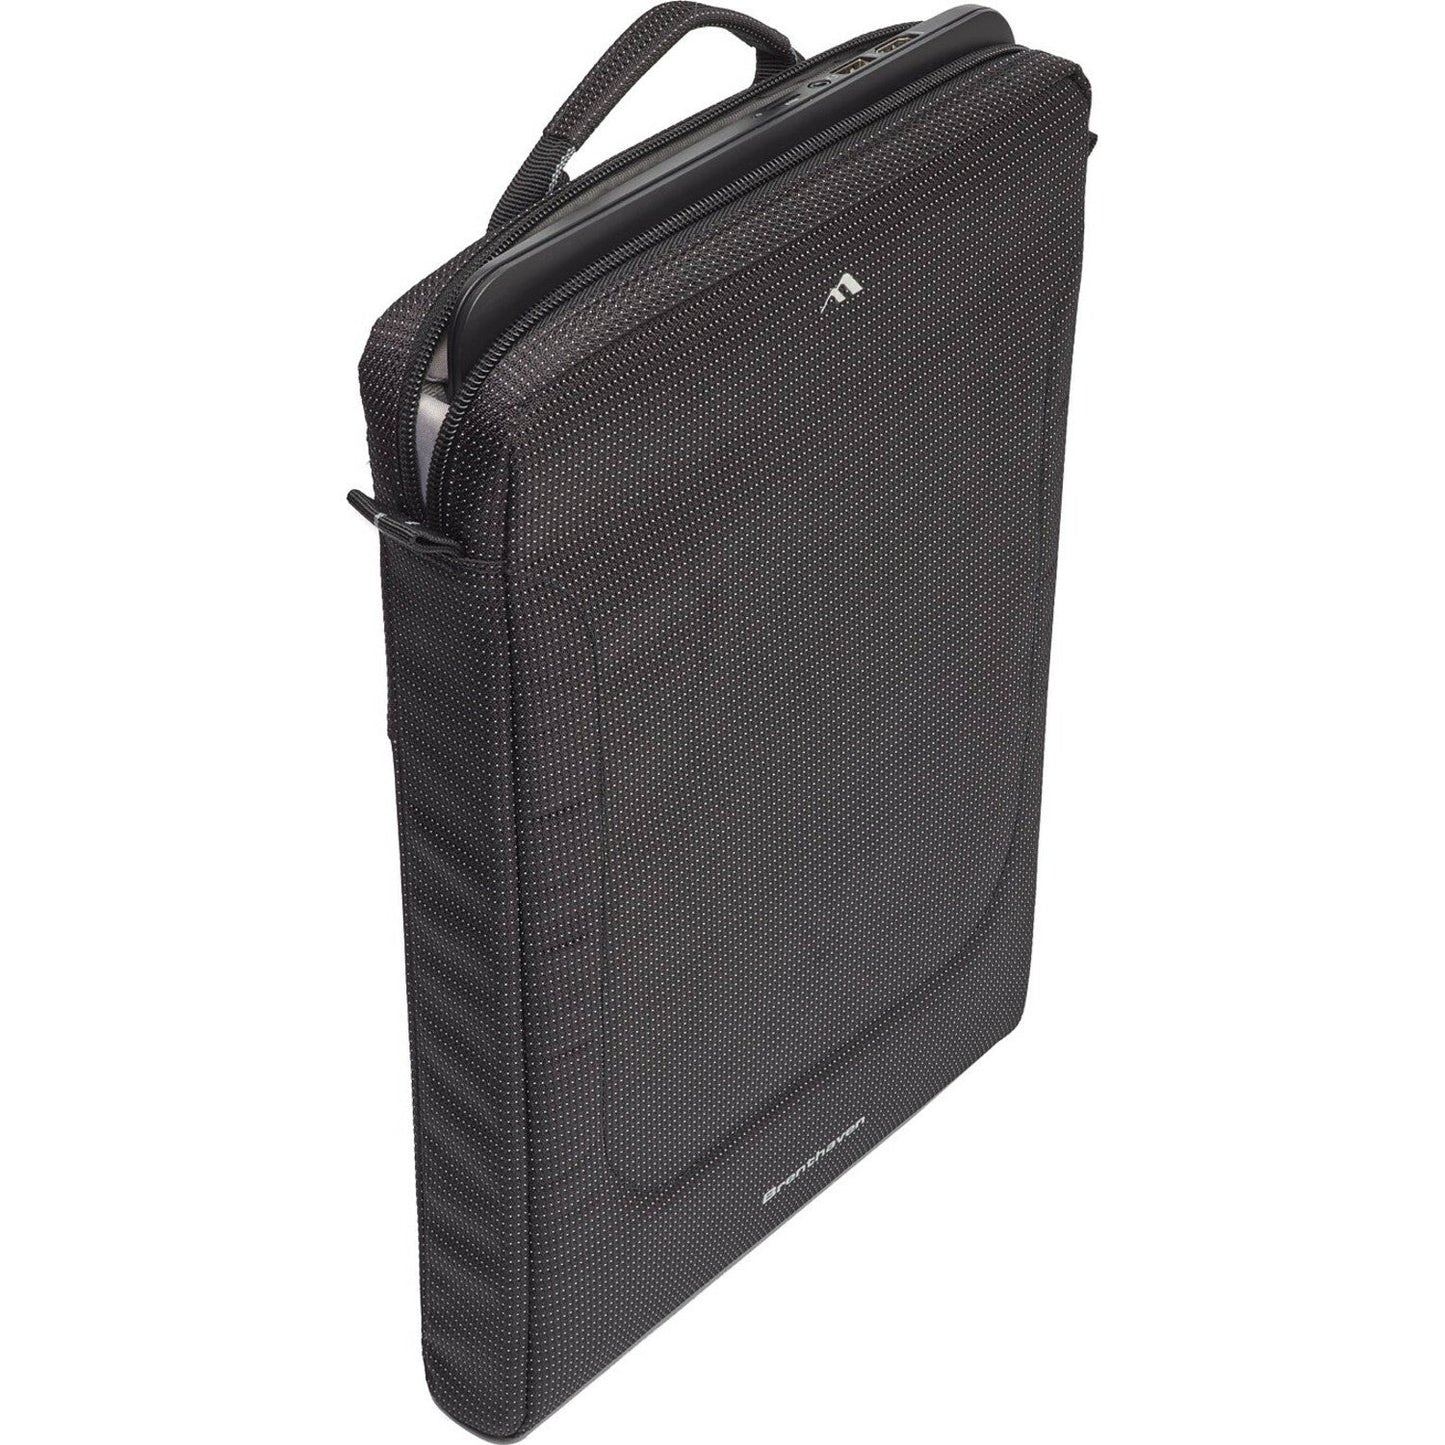 Brenthaven Tred 2689 Carrying Case (Sleeve) for 11" Notebook Chromebook - Black